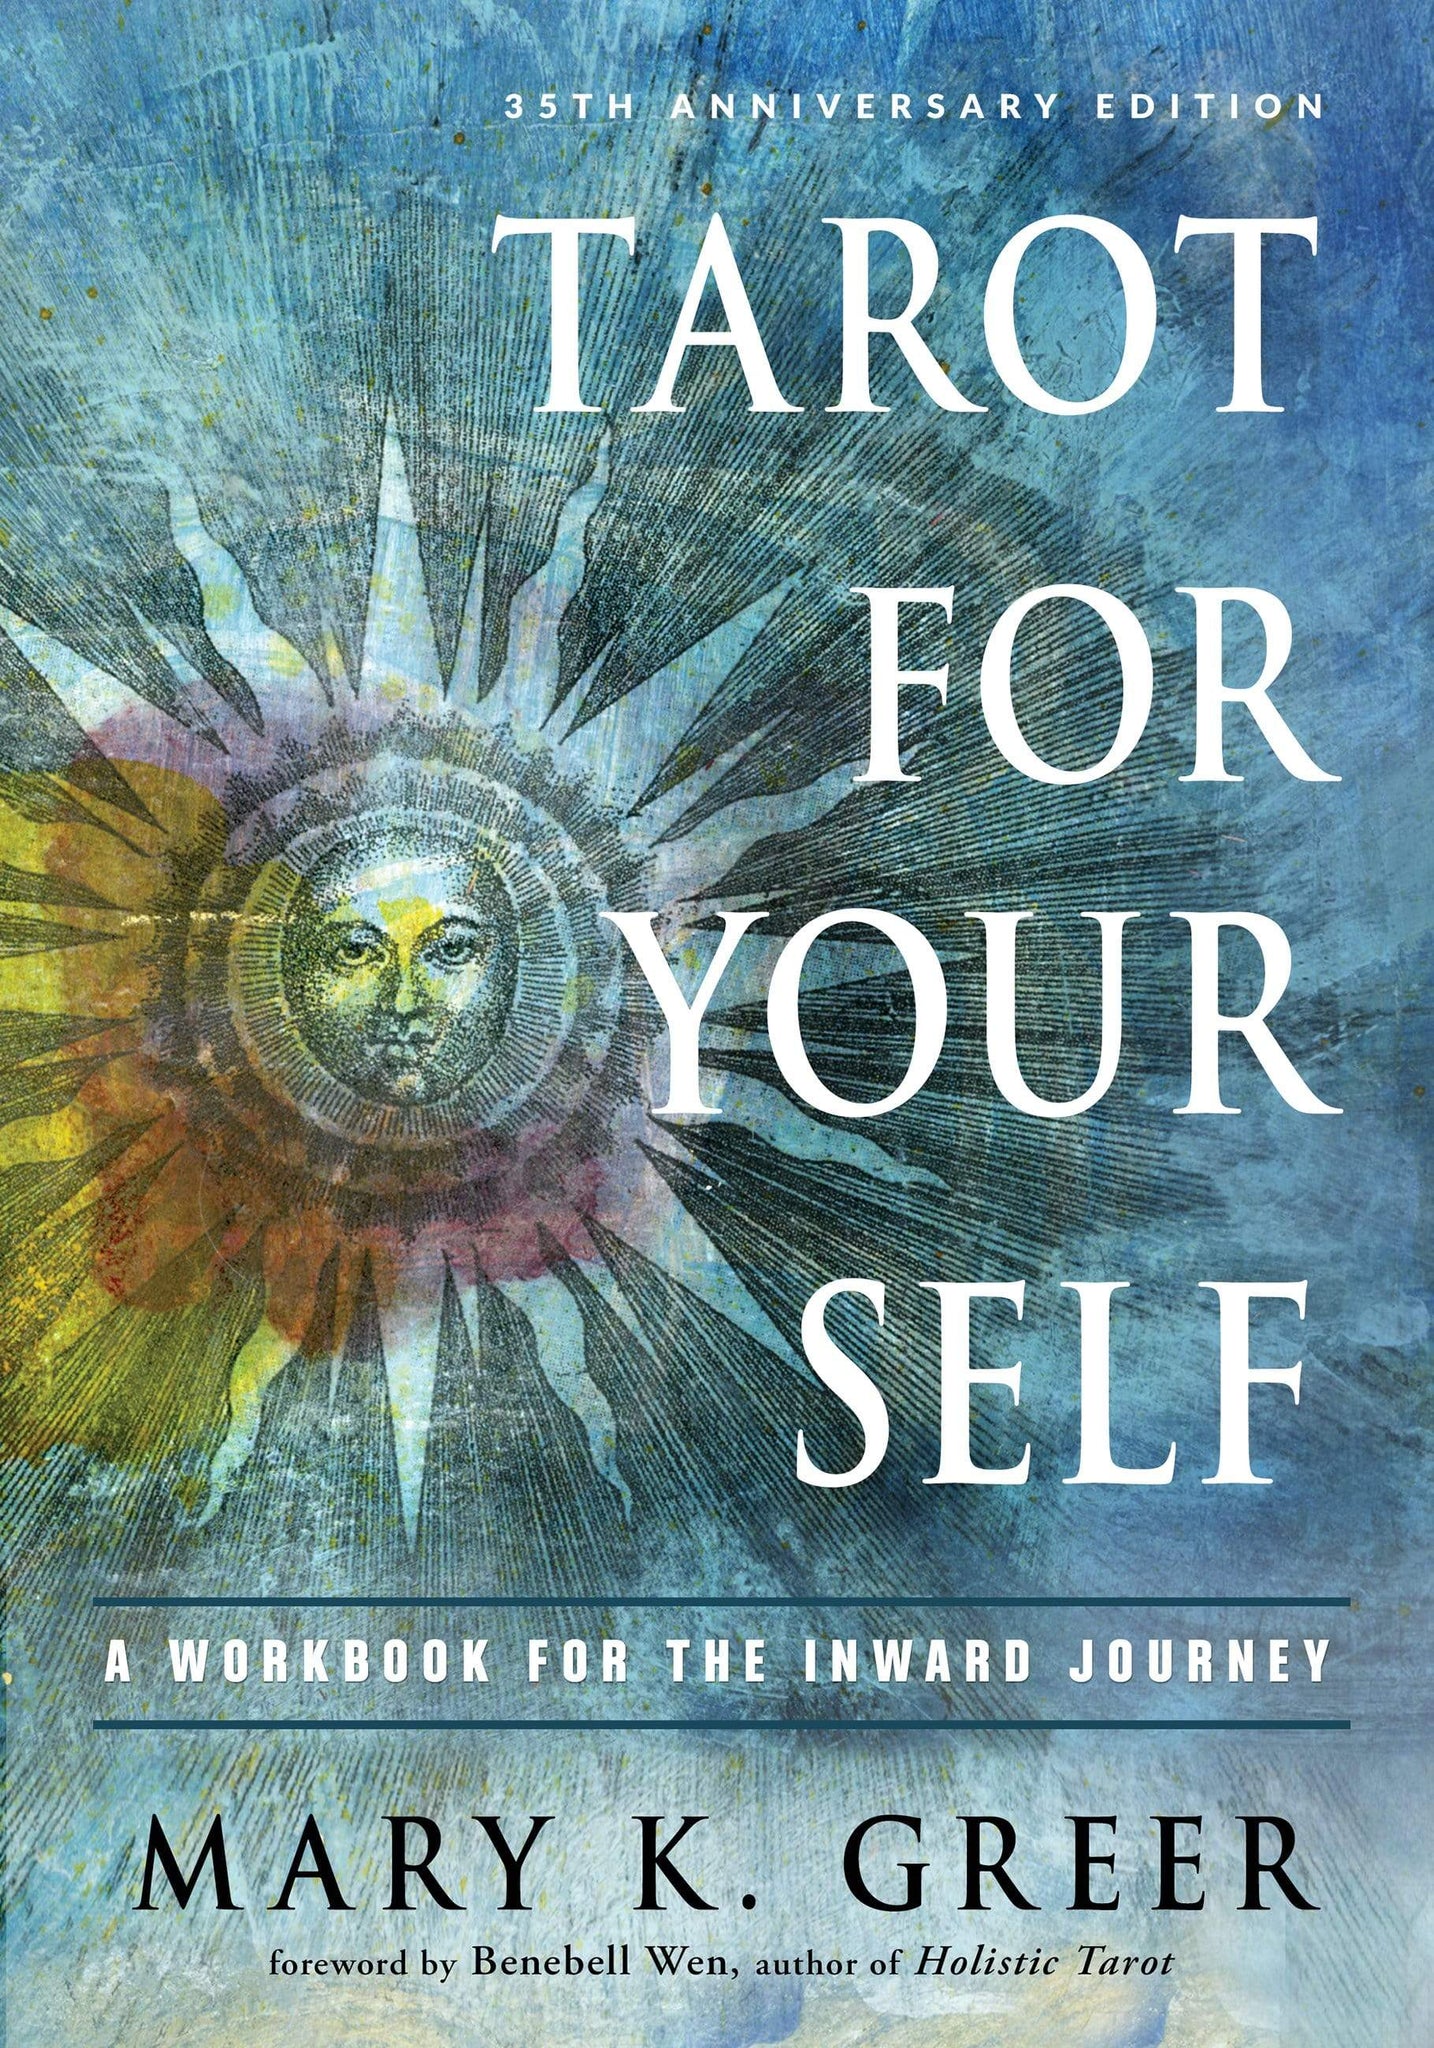 Tarot For Your Self by Mary K. Greer